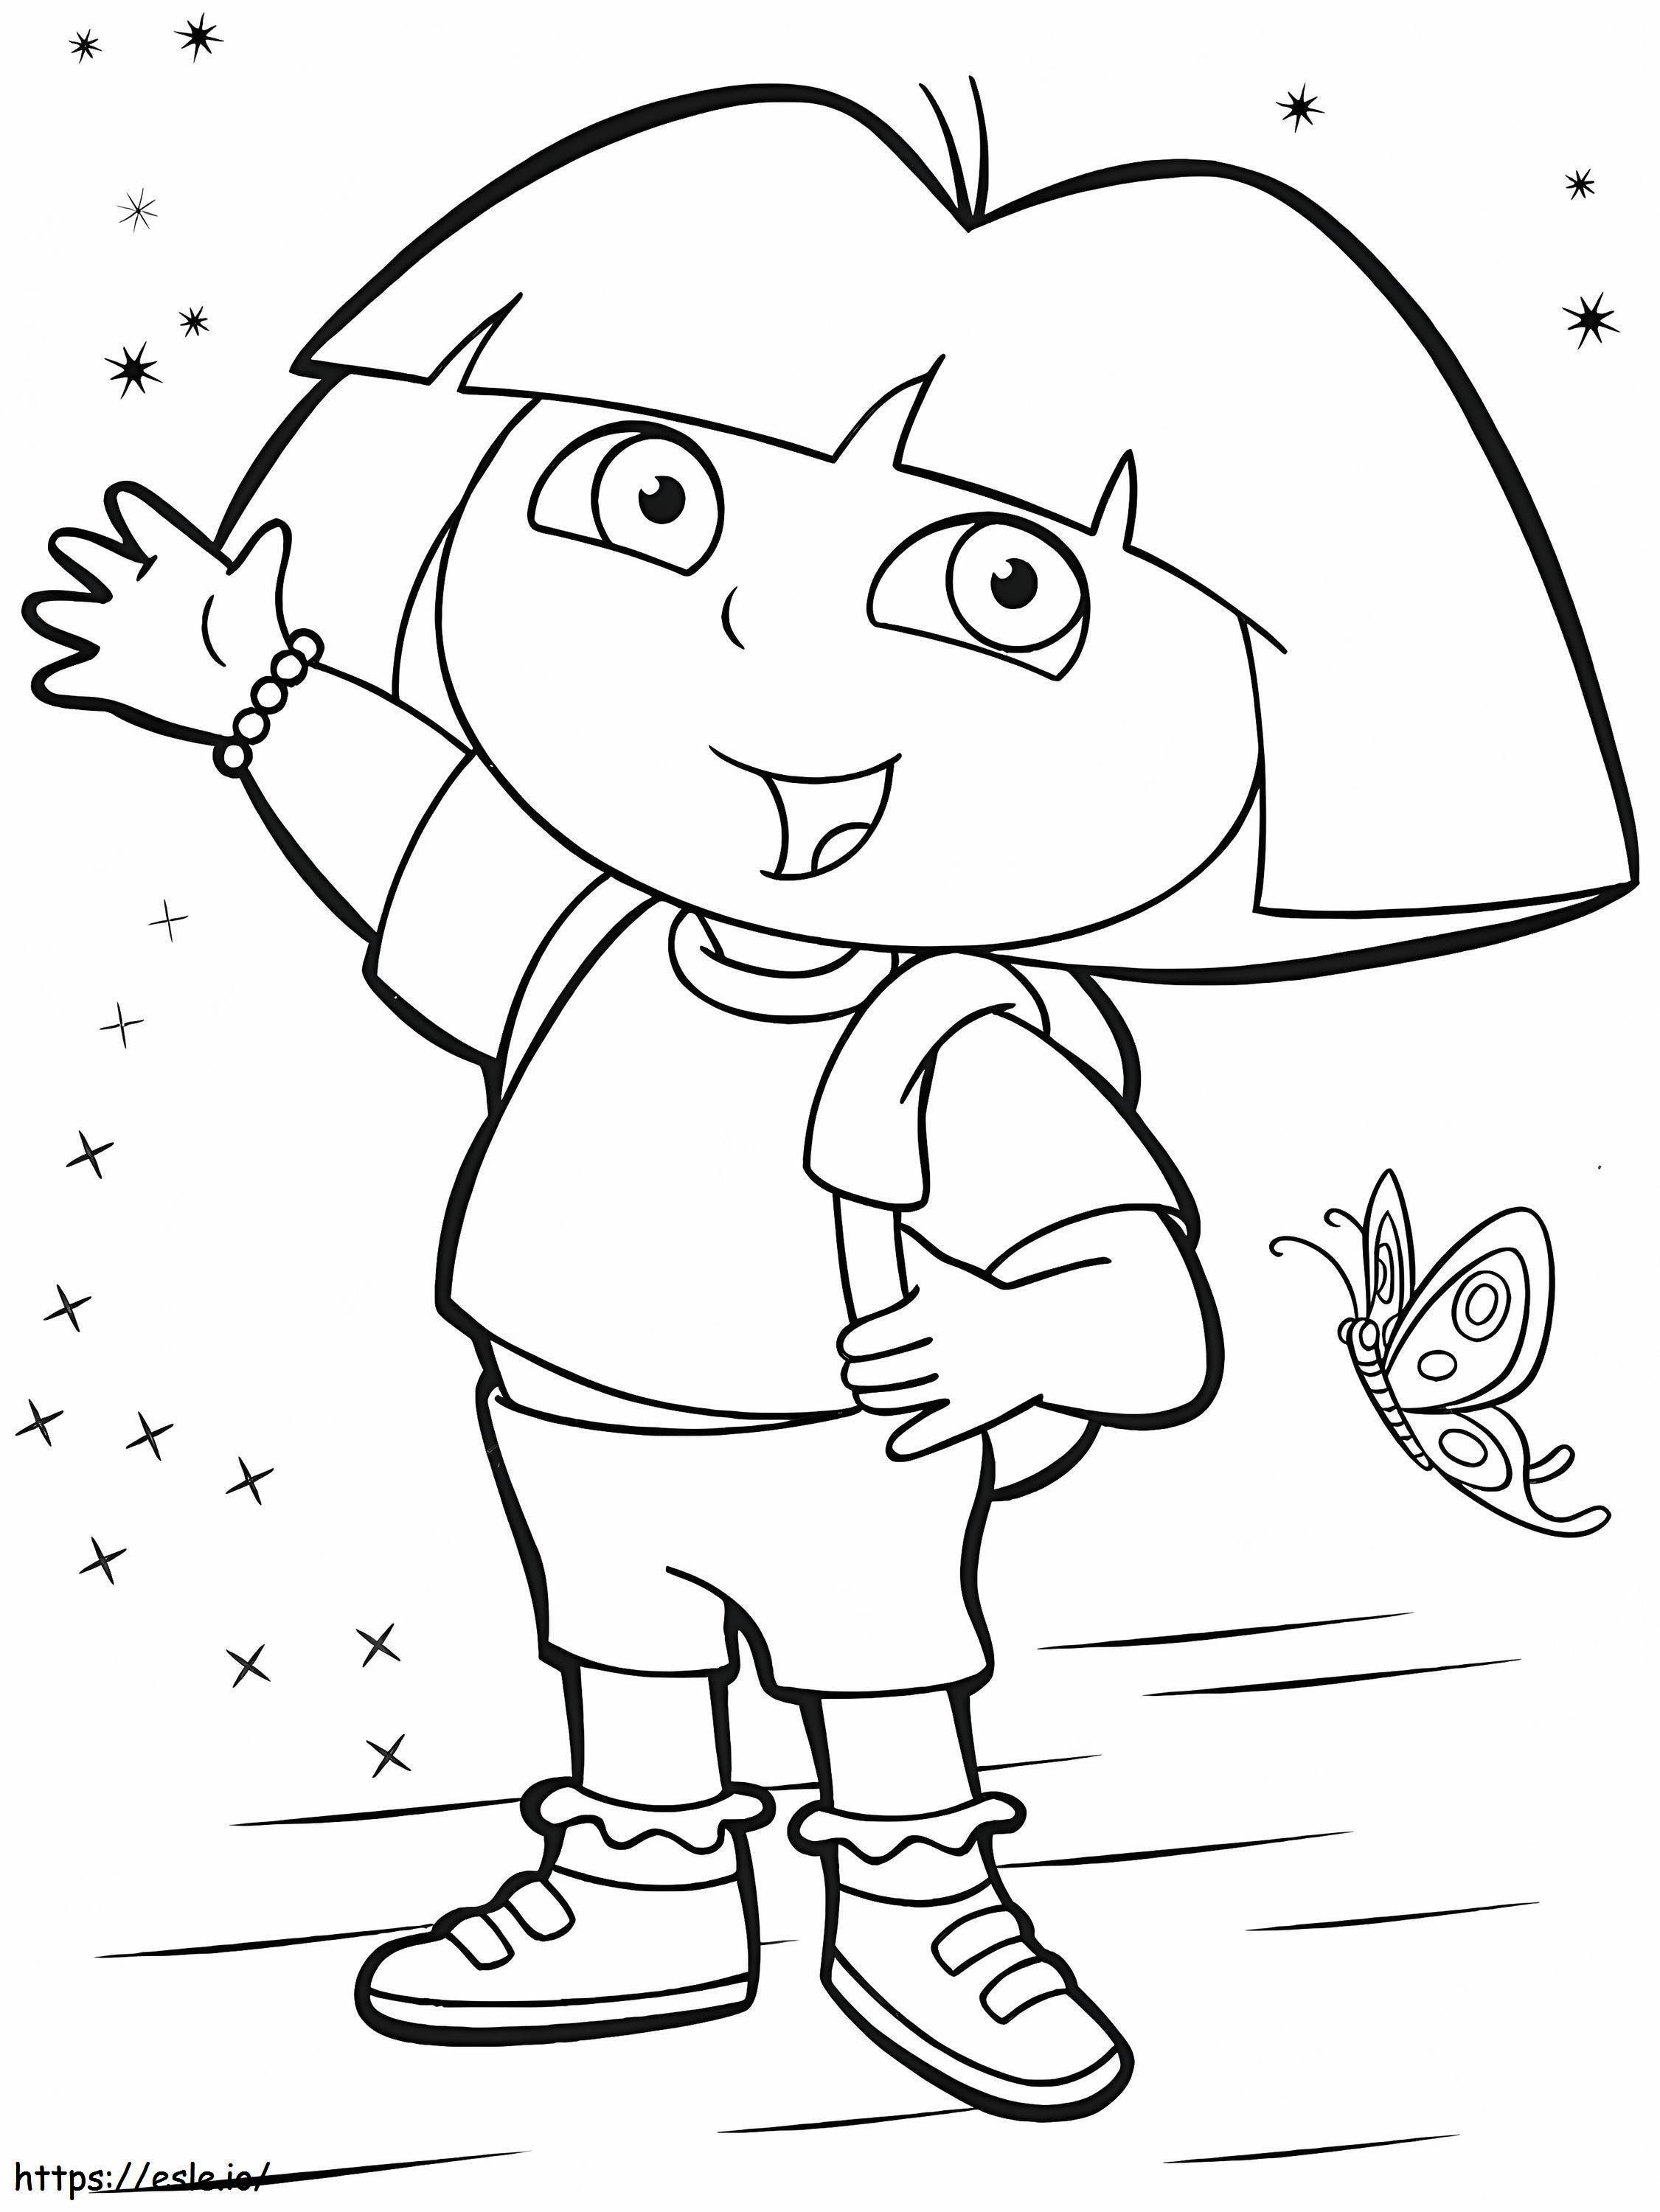 1582795341 Dora The Explorer Sea Creatures Jet Avengers Infinity War Book Dagdrommar Worksheets For Preschool Henna Dinosaur Masha And Bear Jdm Dragon Page Adults Therapy Sheets coloring page